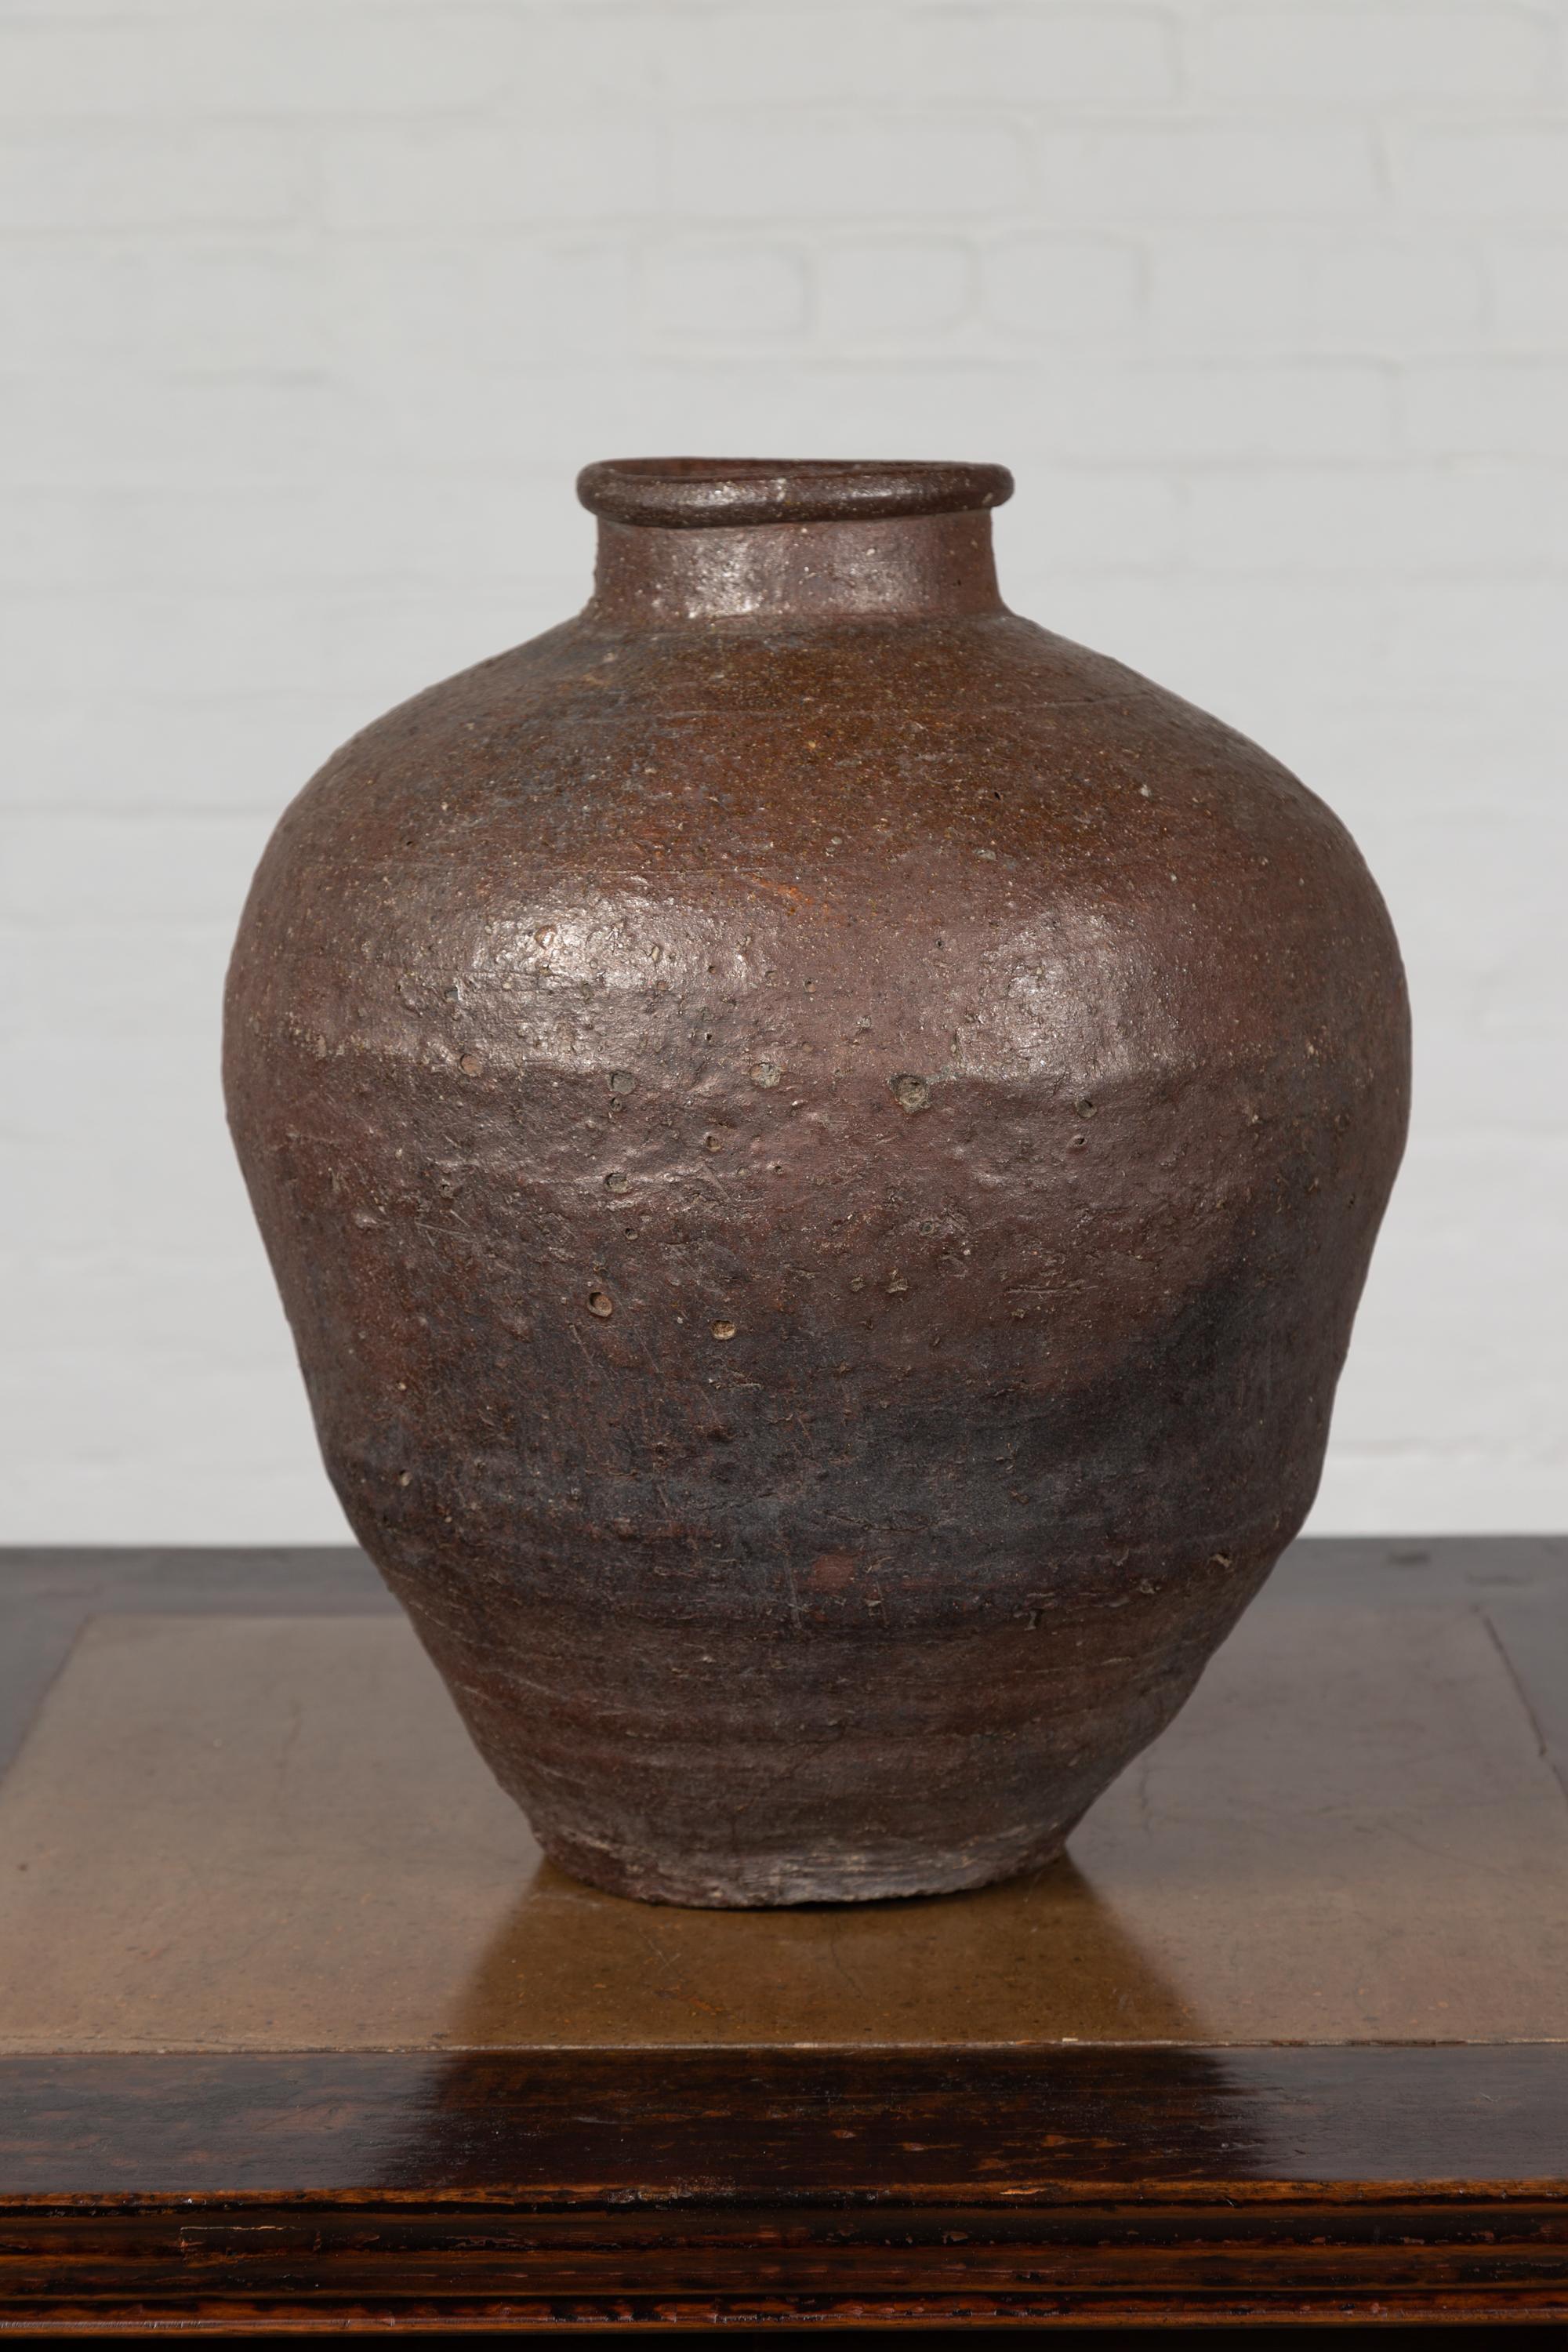 An antique Chinese grain storage urn from the 19th century, with nicely weathered appearance. Born in China during the 19th century, this grain storage urn charms our eyes with its nicely weathered appearance, imperfect lines and brown color with